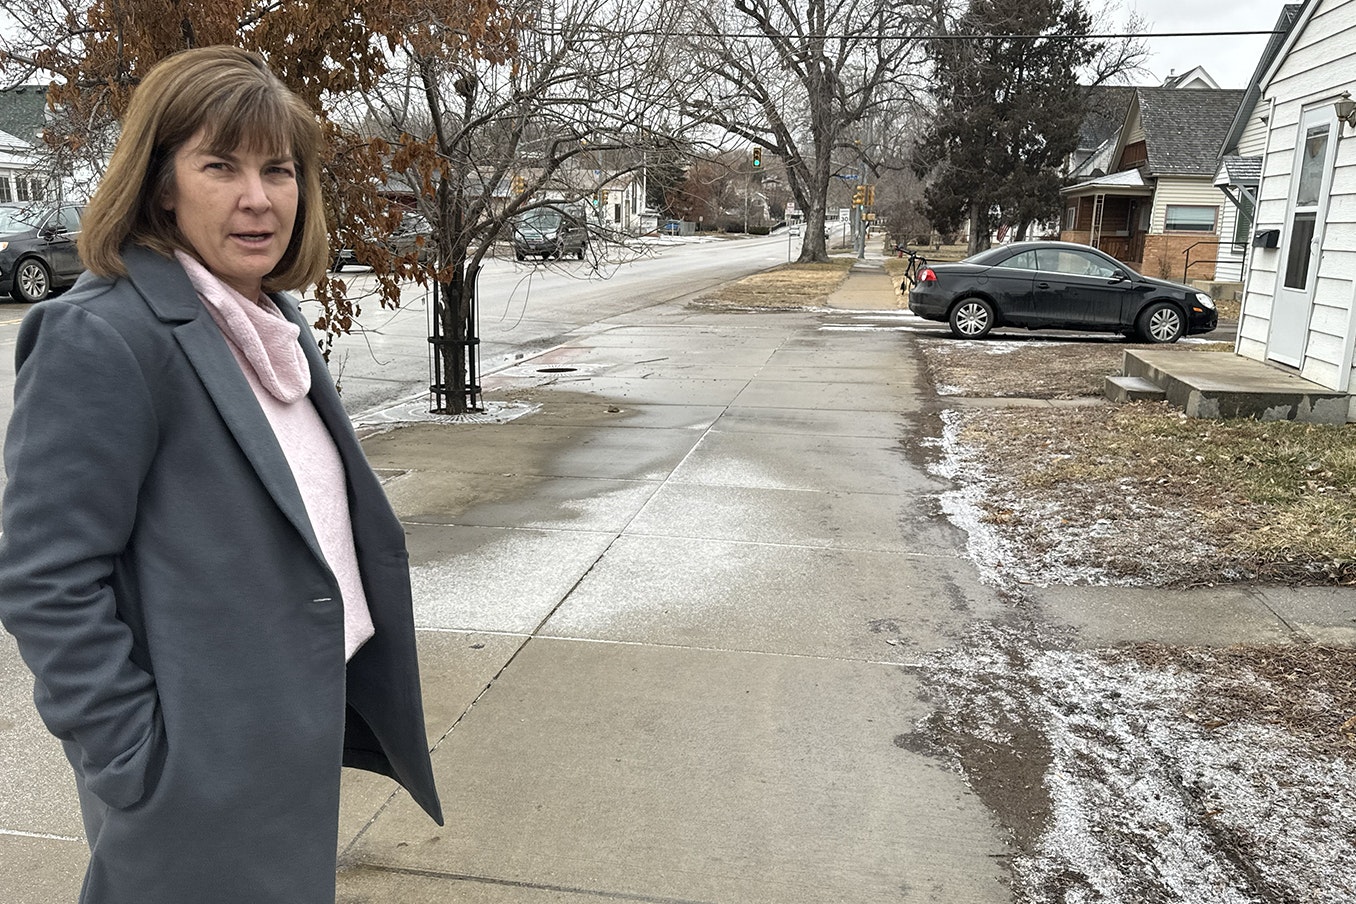 Lisa Mueller is a real estate agent with MC2 Collaborative in Sheridan less than a block from 58 5th St. where Sgt. Nevada Krinkee was killed. She said she heard first one, then four more gunshots, and saw police chase as suspect east.